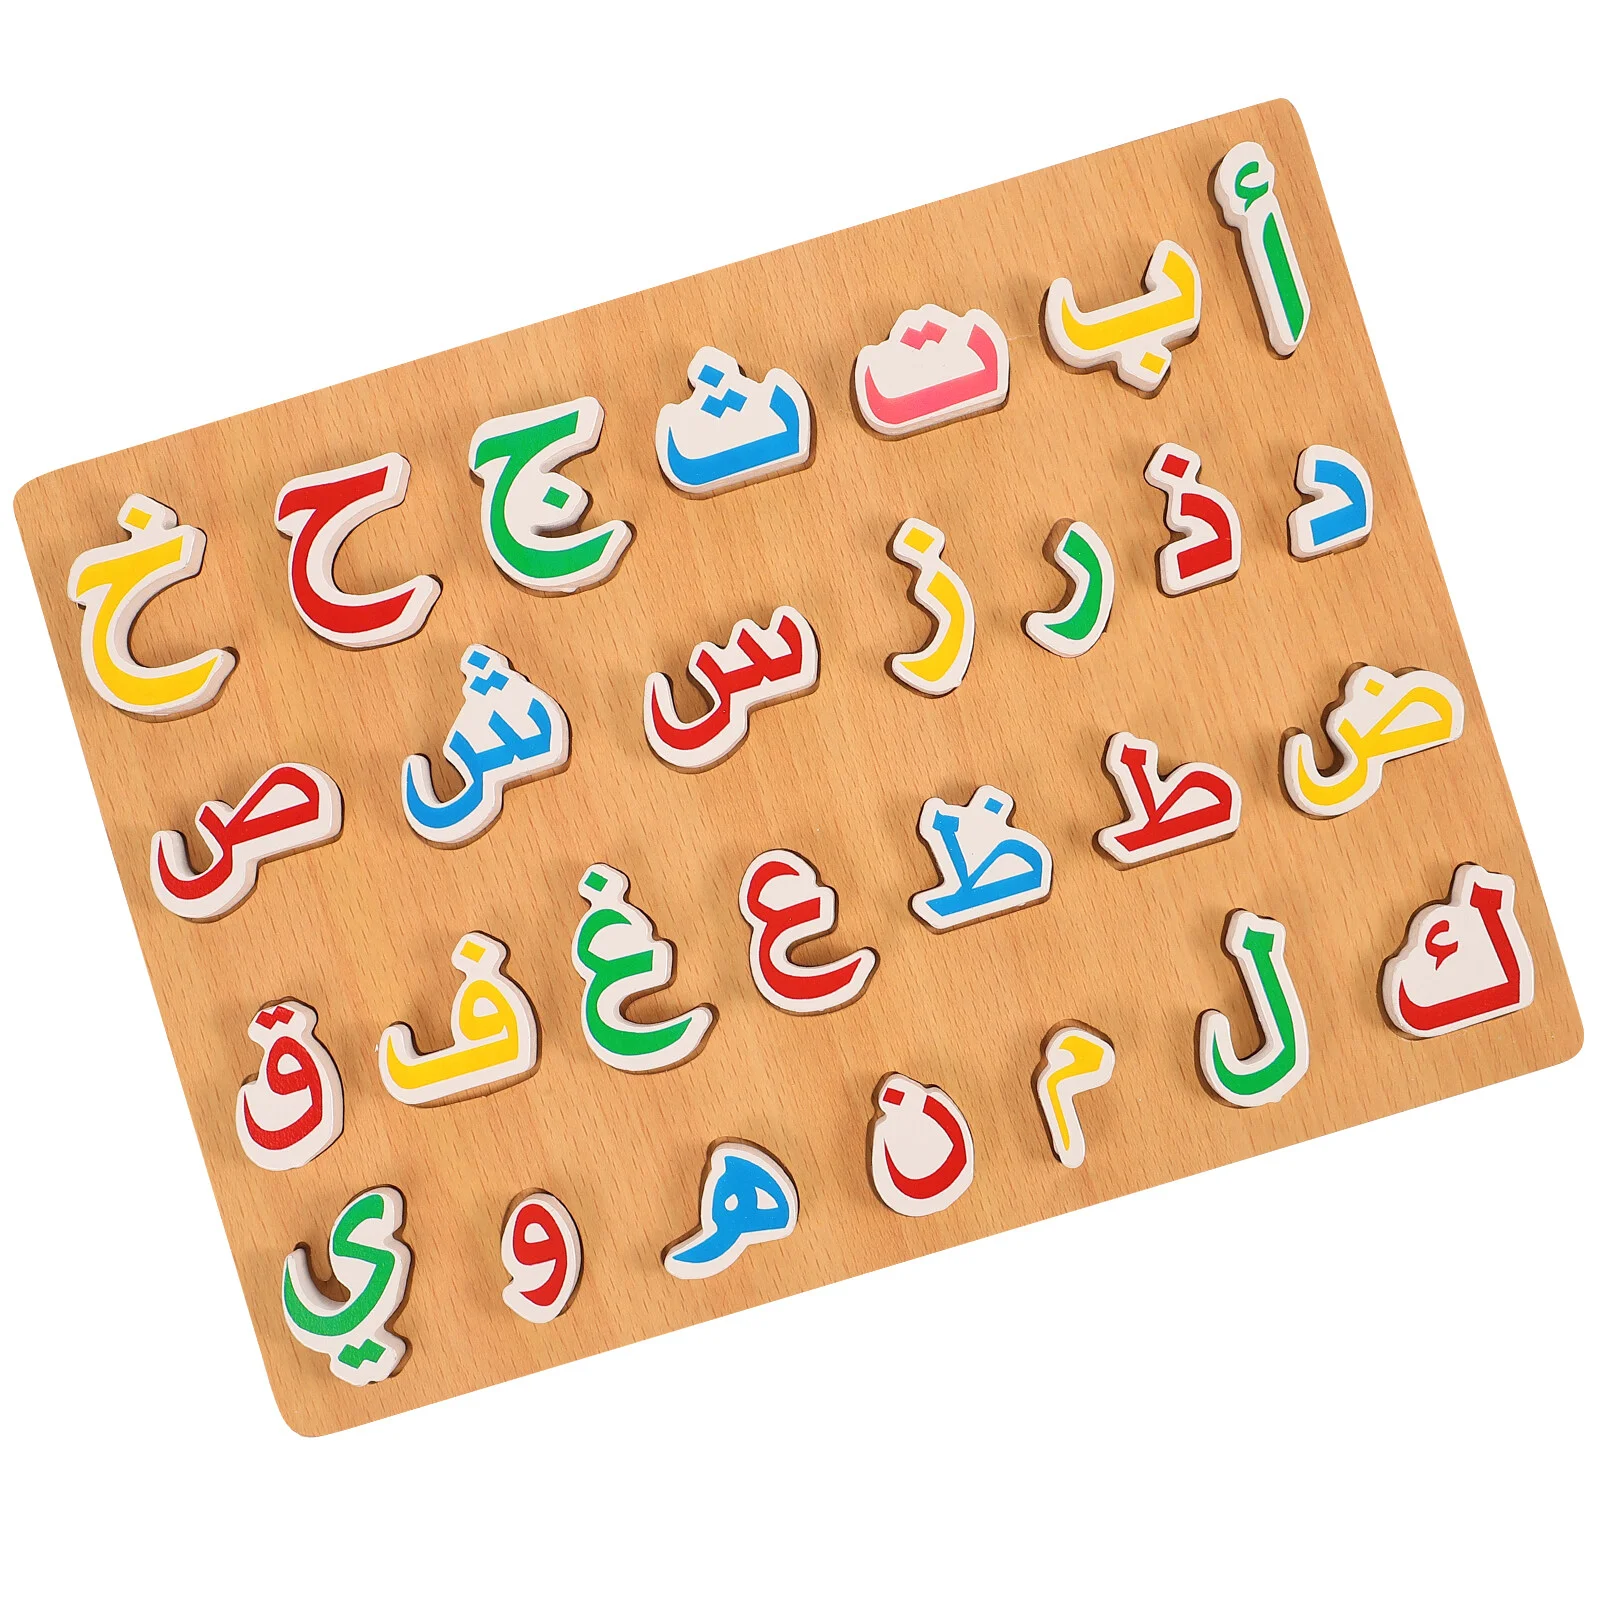 

Arabic Puzzle Wooden Toddler Puzzles Children Education Plaything Kids Matching Jigsaw Logical Favor Toy Toys Preschool Funny